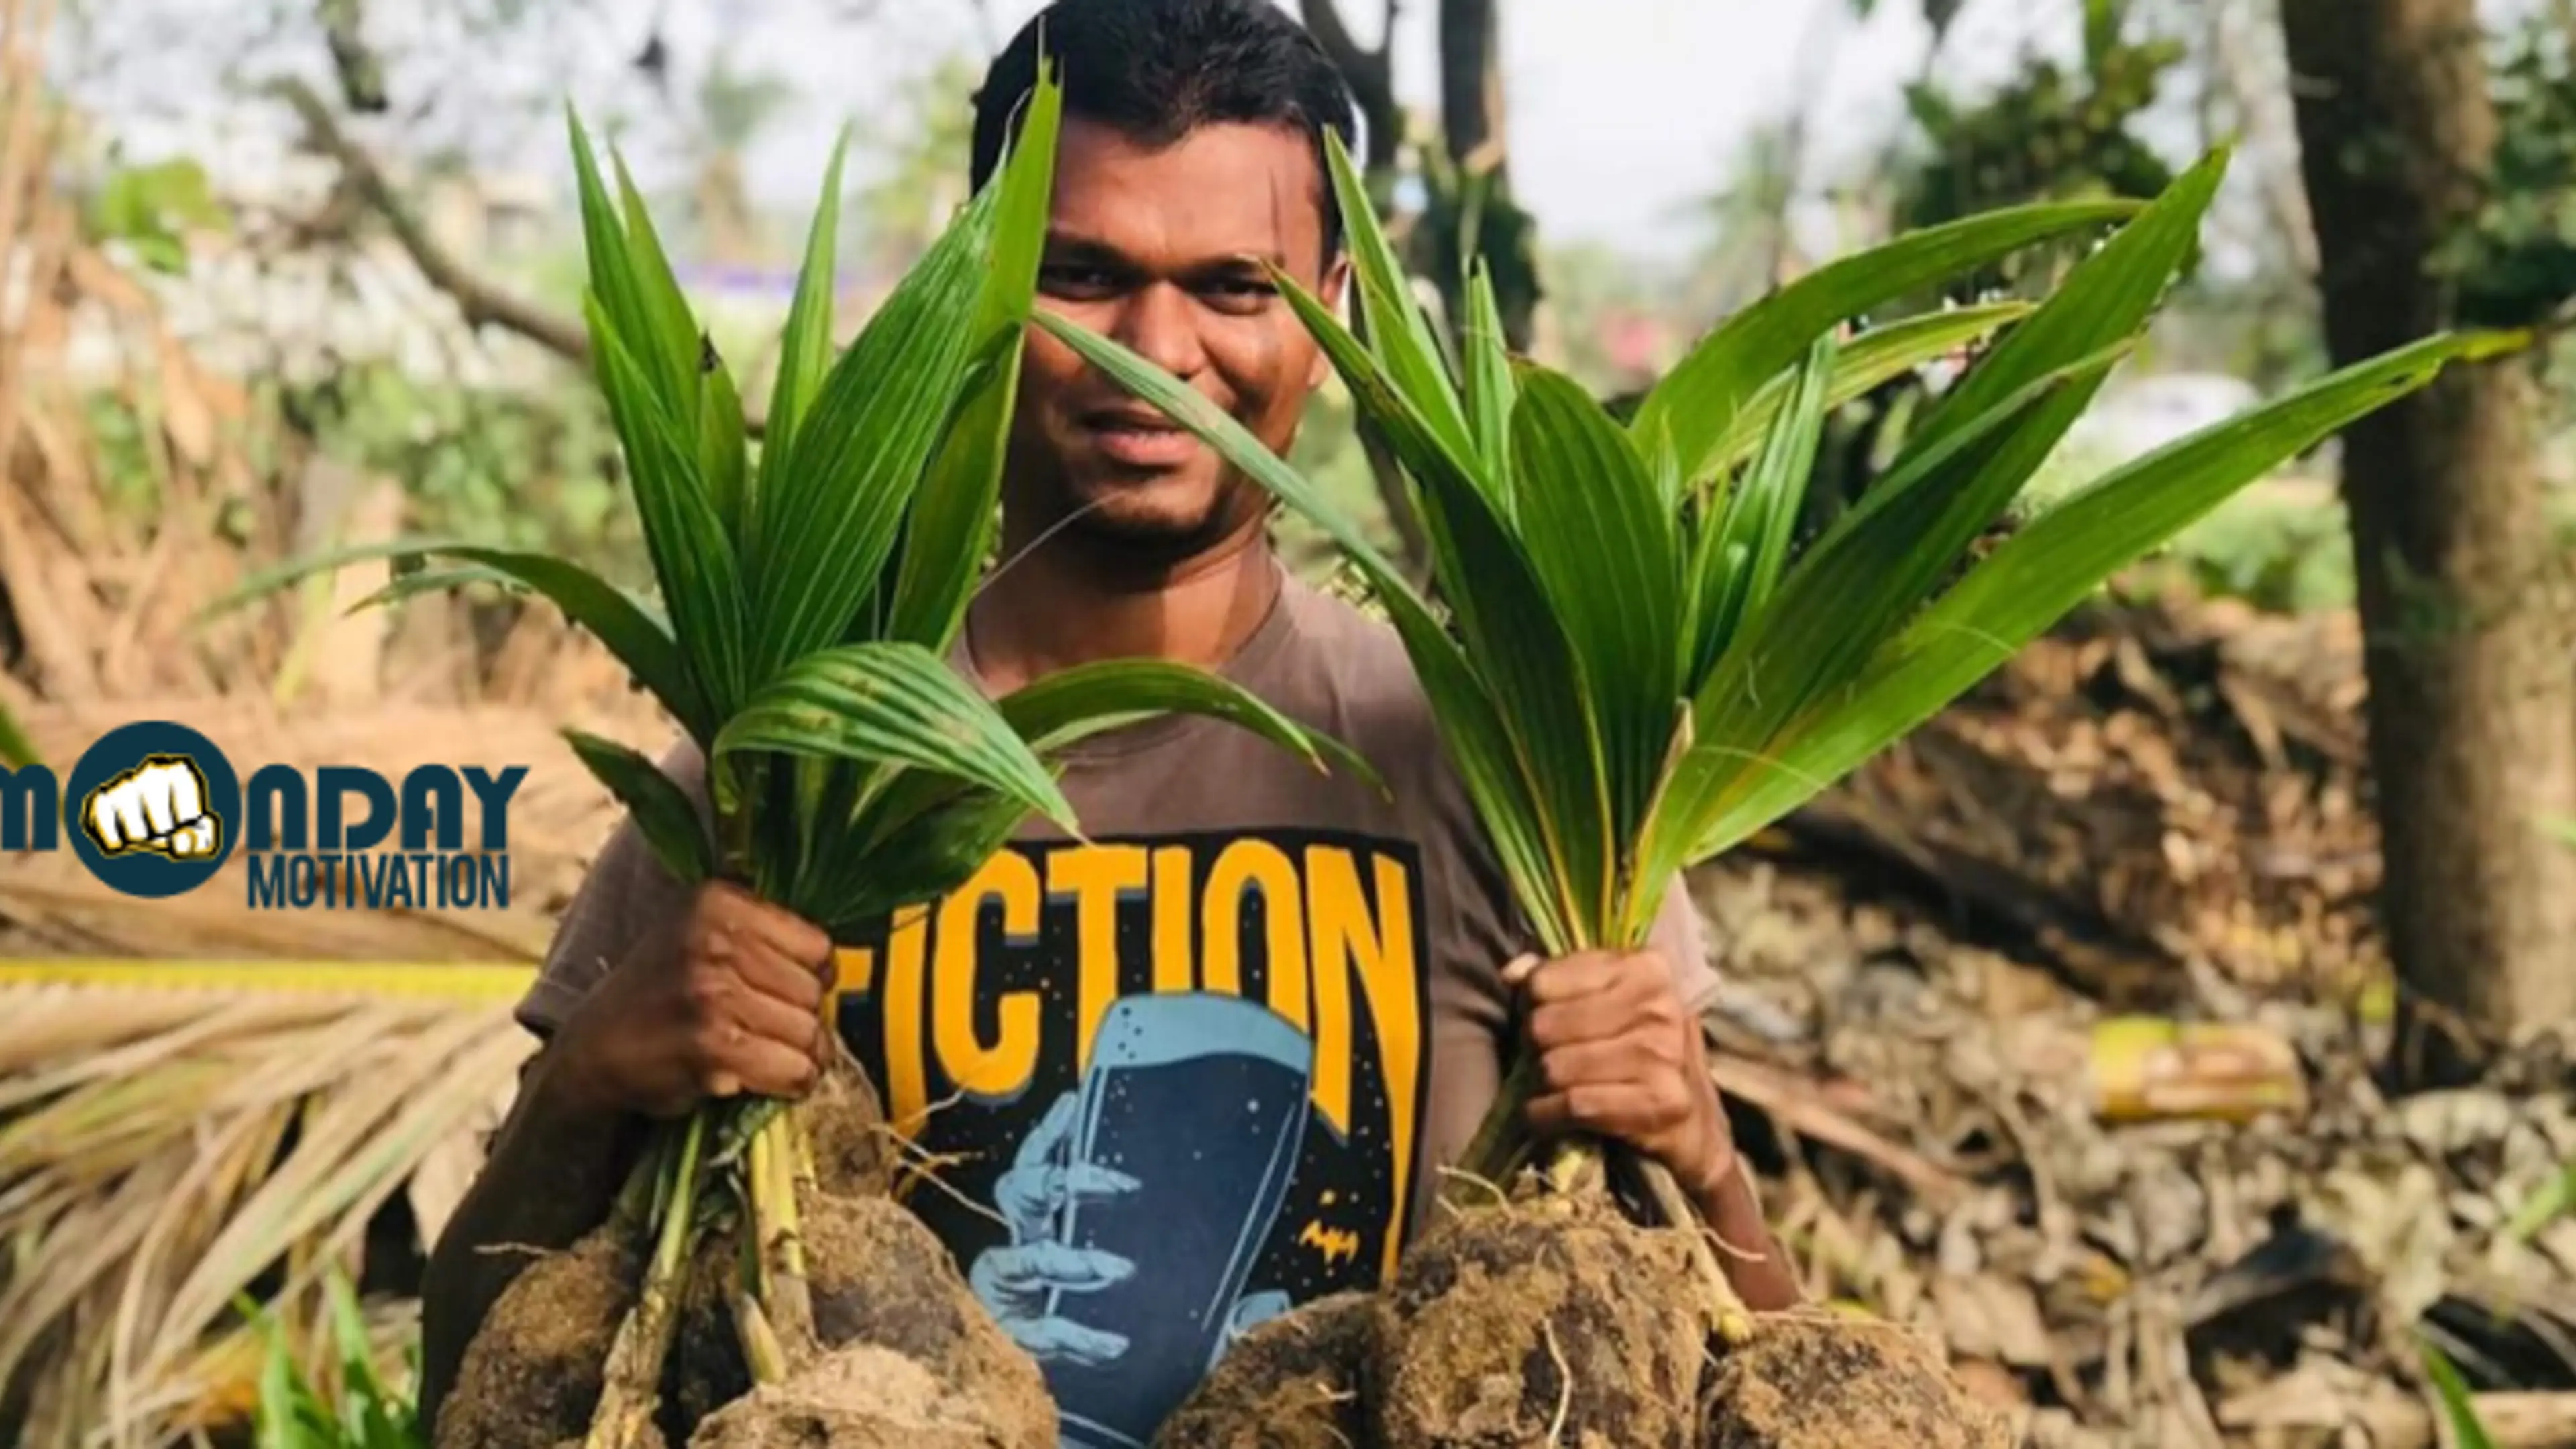 Meet the techie who quit his job to help restore agriculture across 90 cyclone-affected villages in India